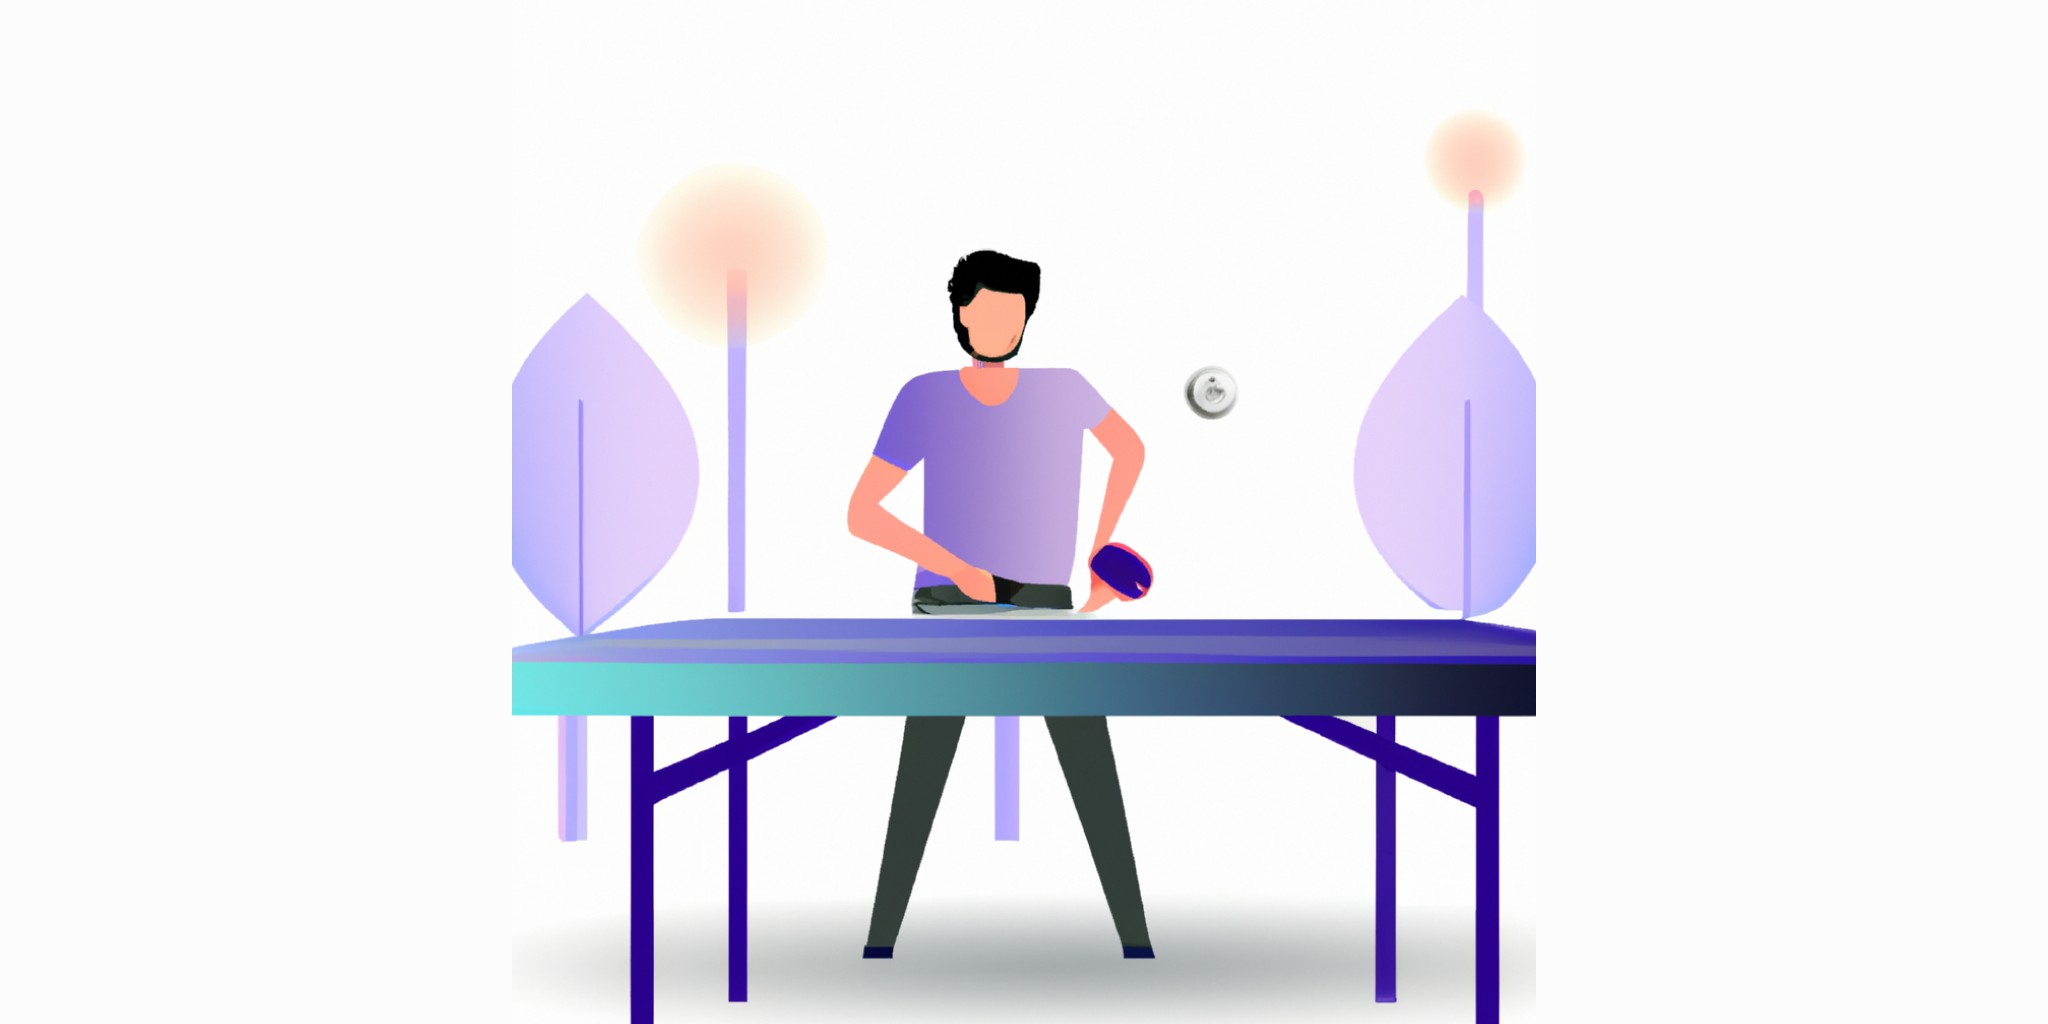 ping pong table with a person in front in flat illustration style with gradients and white background